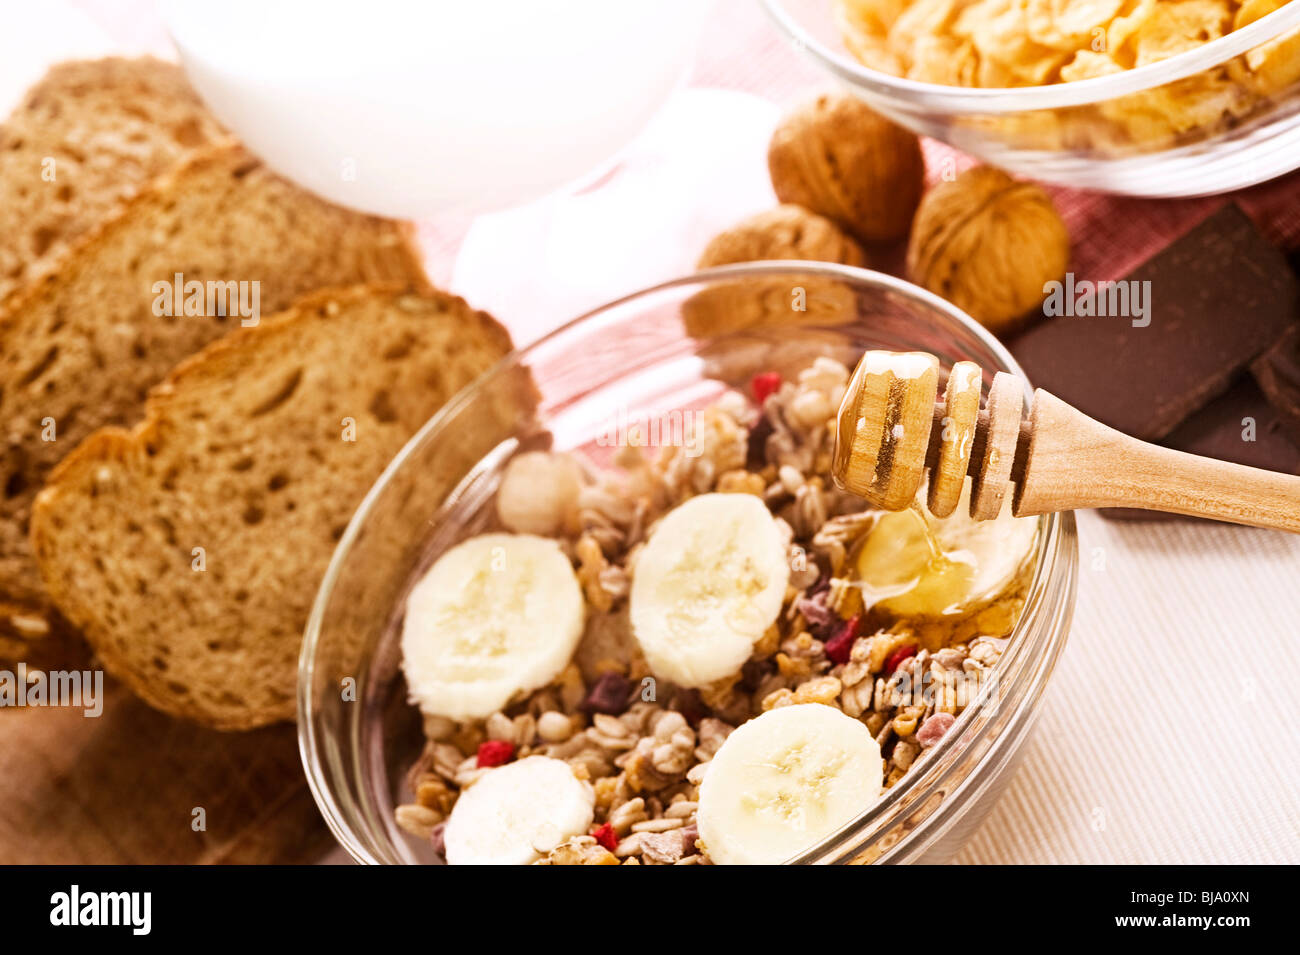 healthy breakfast composition on the table Stock Photo